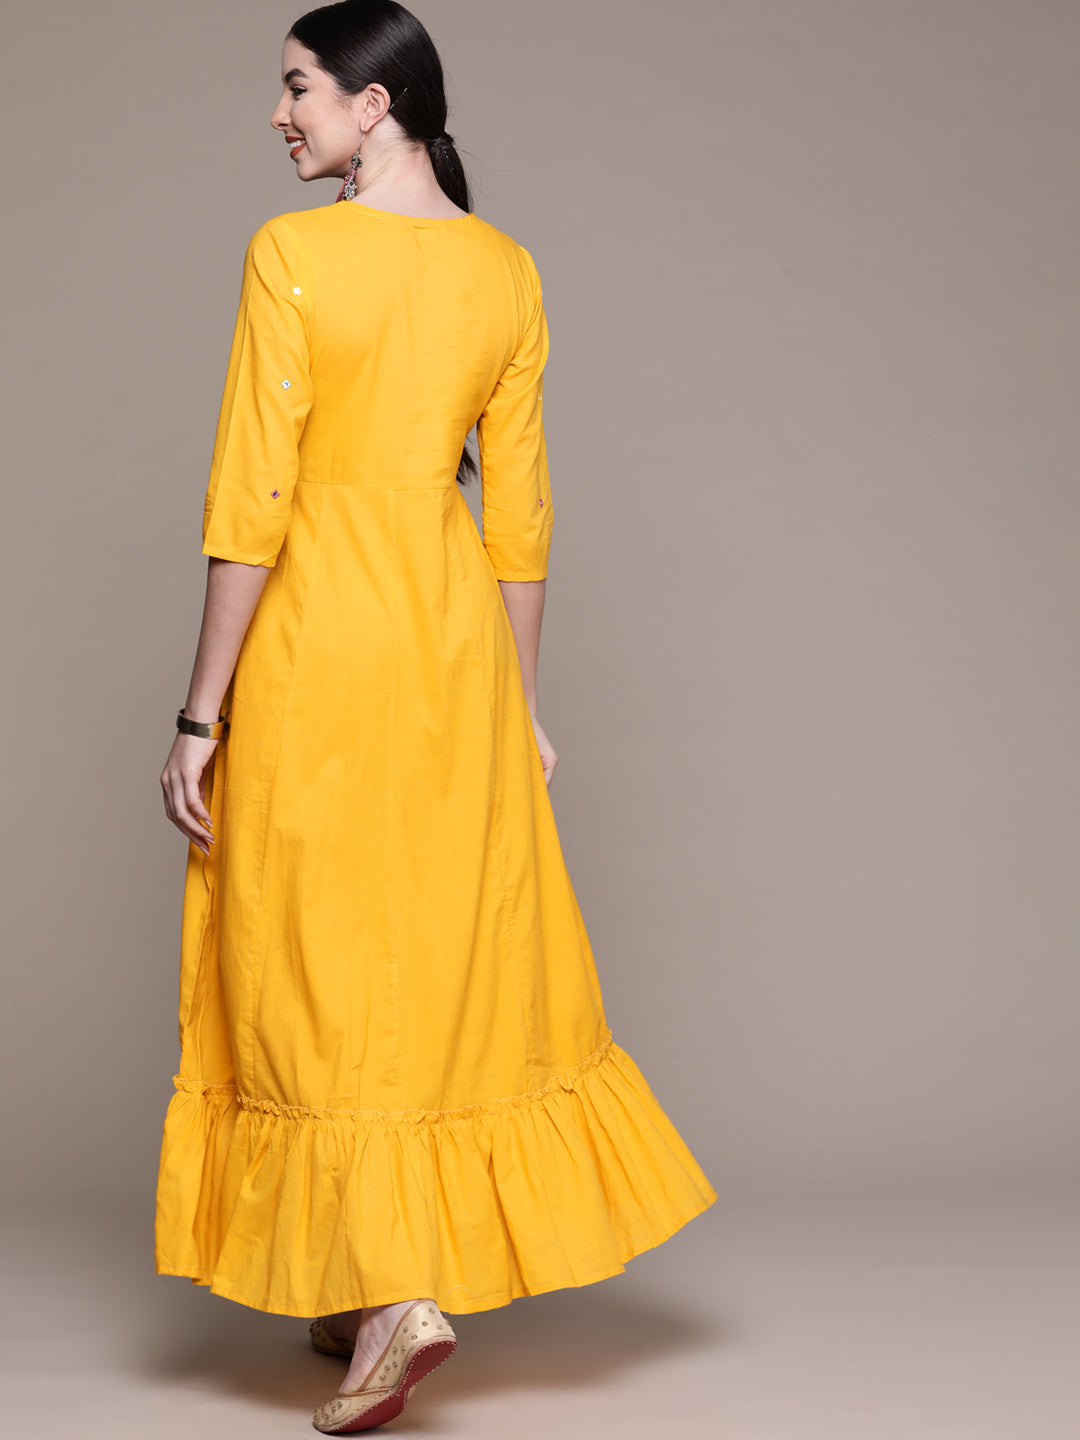 Women's Yellow Embellished Ethnic Cotton A-Line Maxi Dress